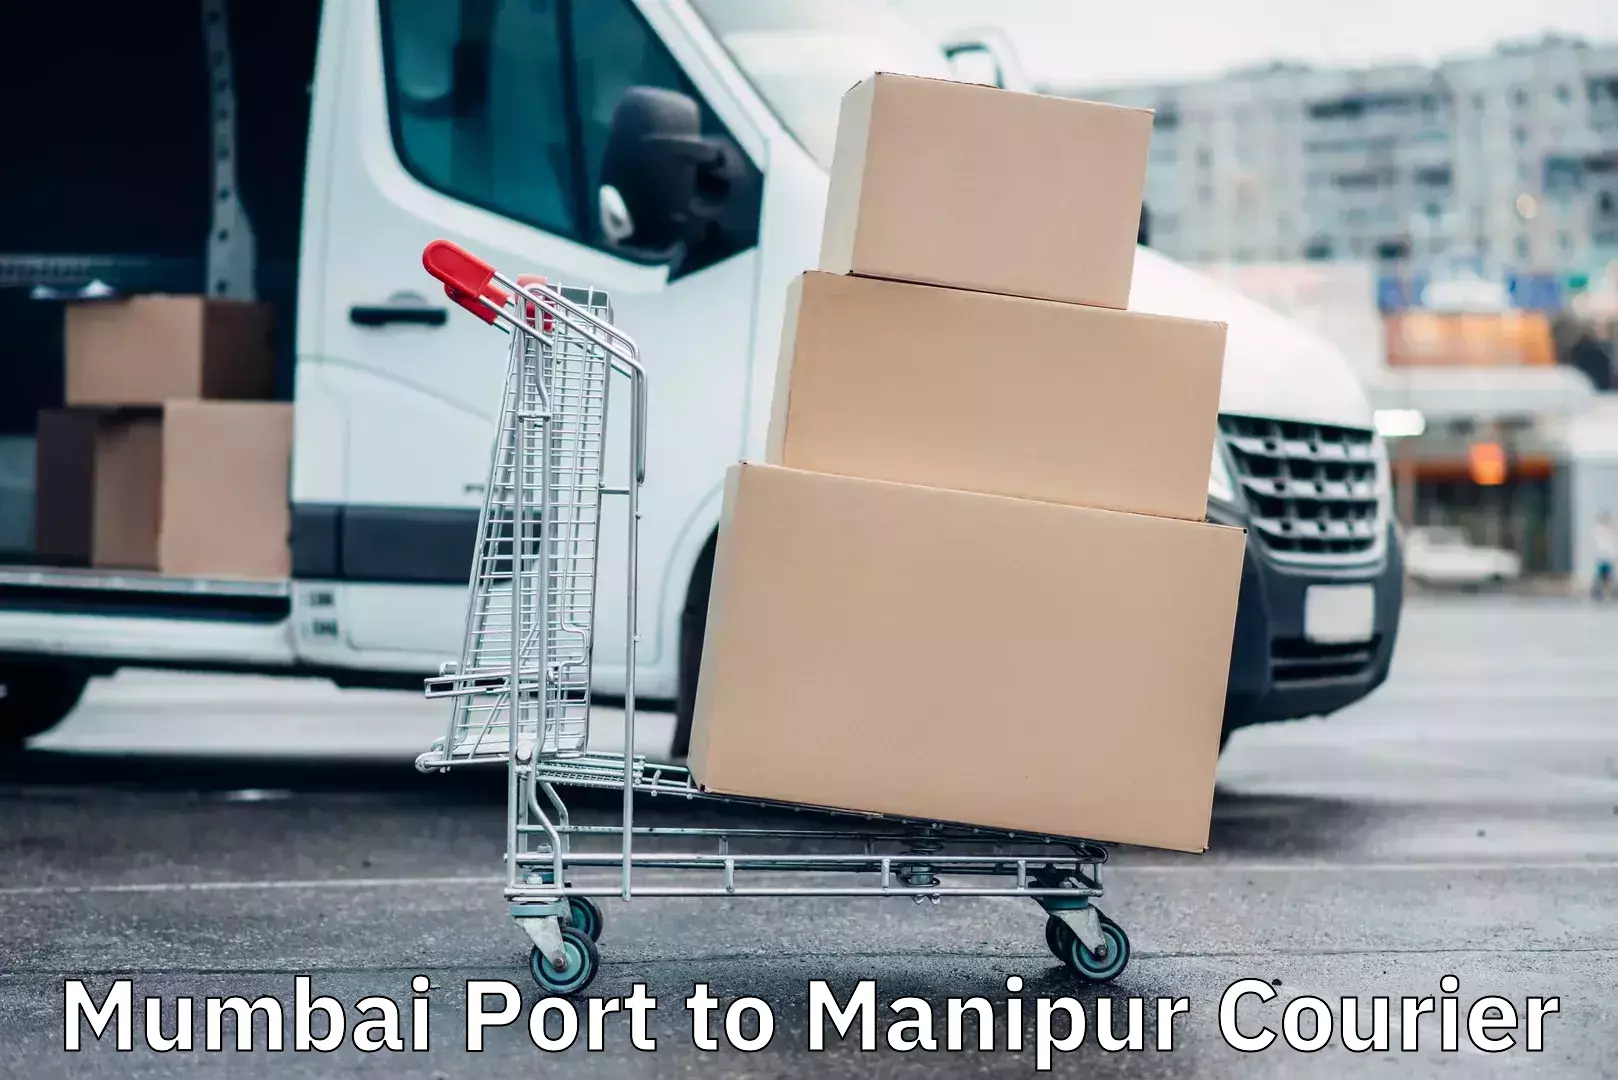 Express delivery solutions in Mumbai Port to Manipur